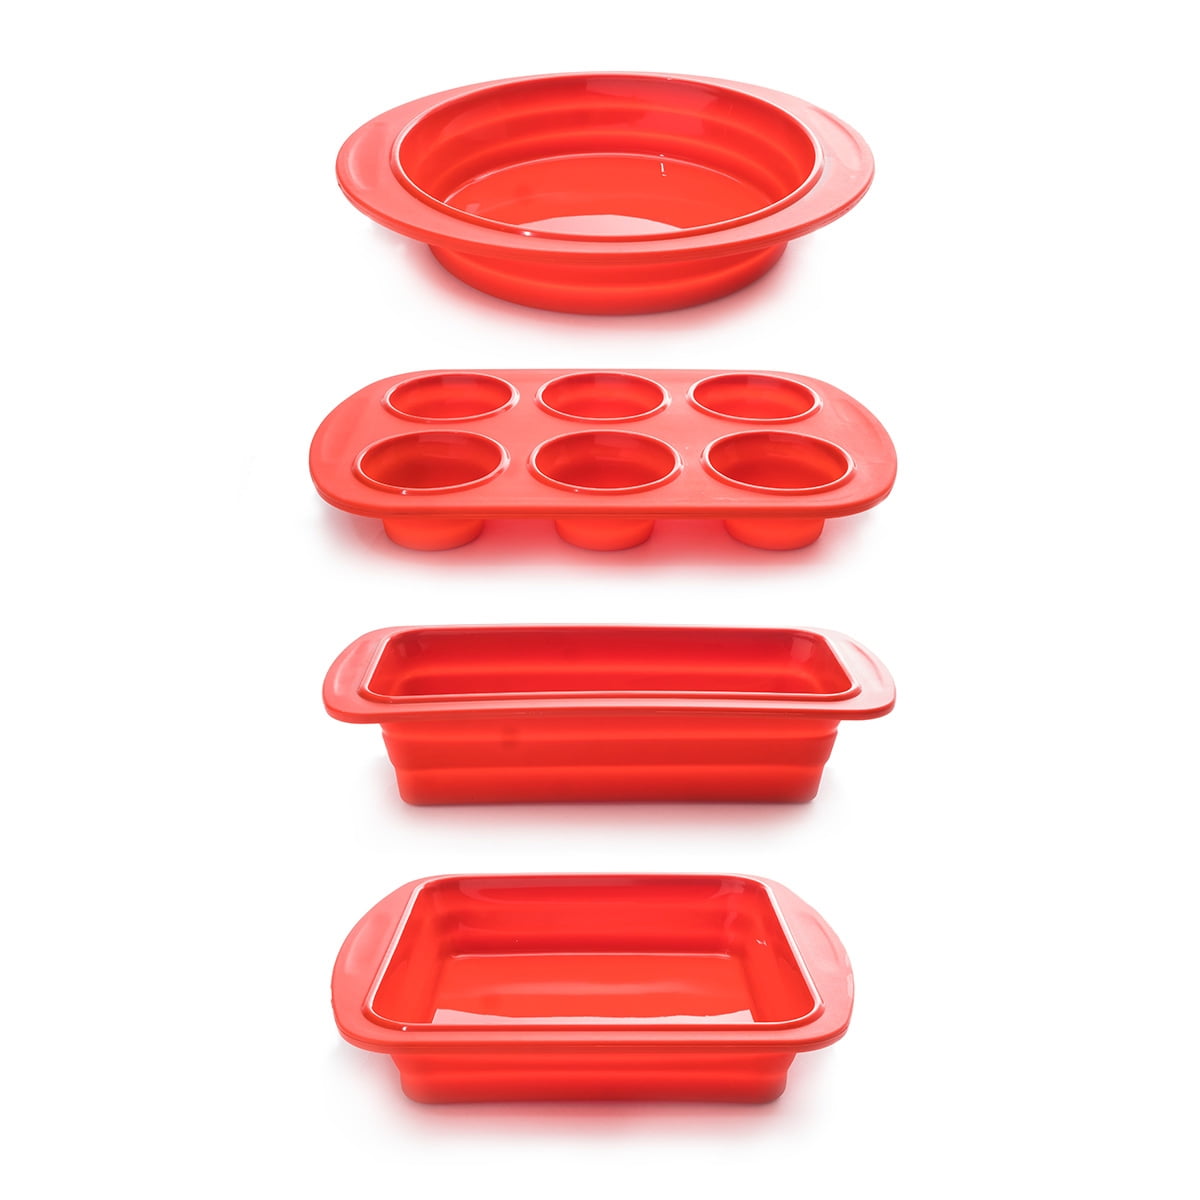 Buy Silicone Bakeware & Kitchen Accessories from Cook'n'Chic®